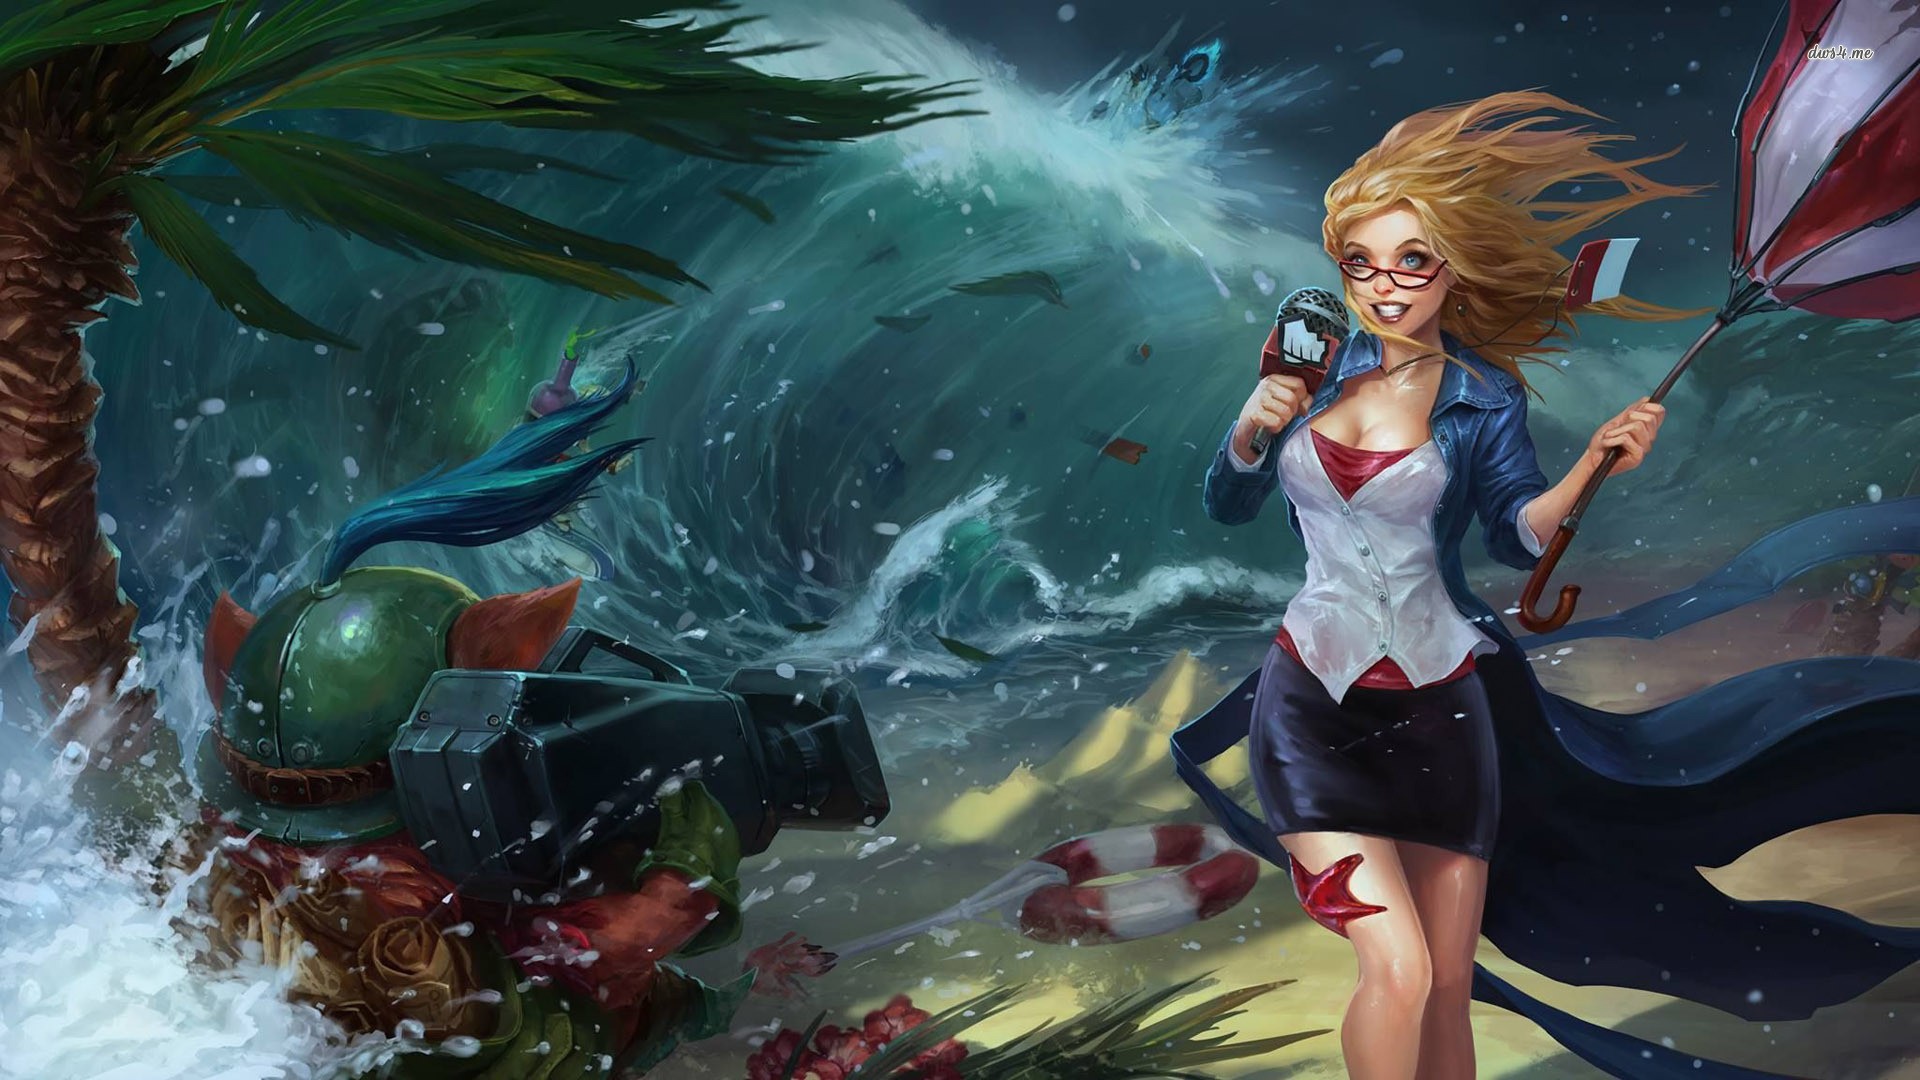 General 1920x1080 League of Legends artwork video games Teemo (League of Legends) Janna (League of Legends) PC gaming umbrella women with umbrella DeviantArt microphone women with glasses boobs waves video game art fan art video game girls windy